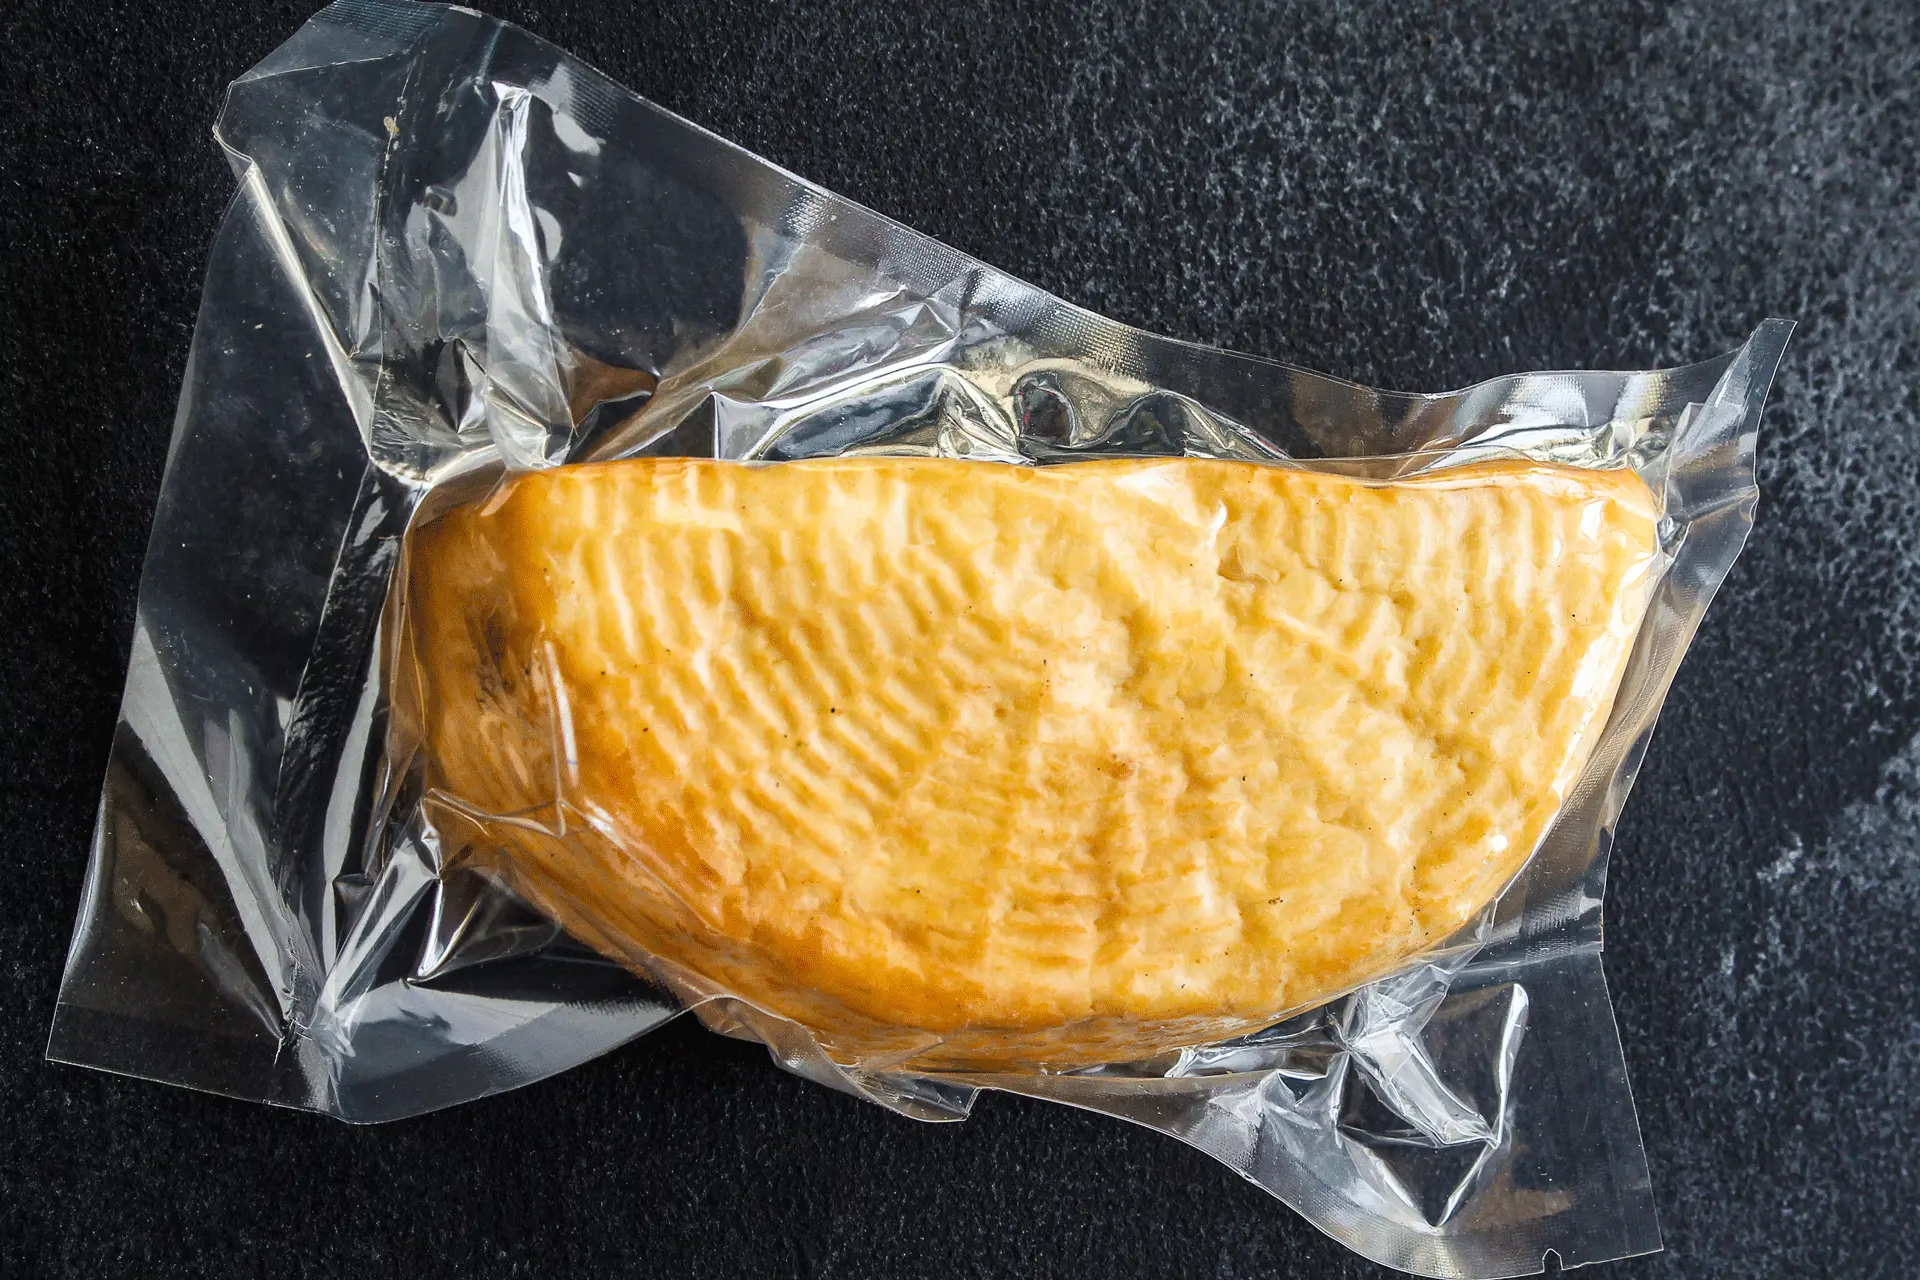 Smoked fish or smoked cheese sealed in foil